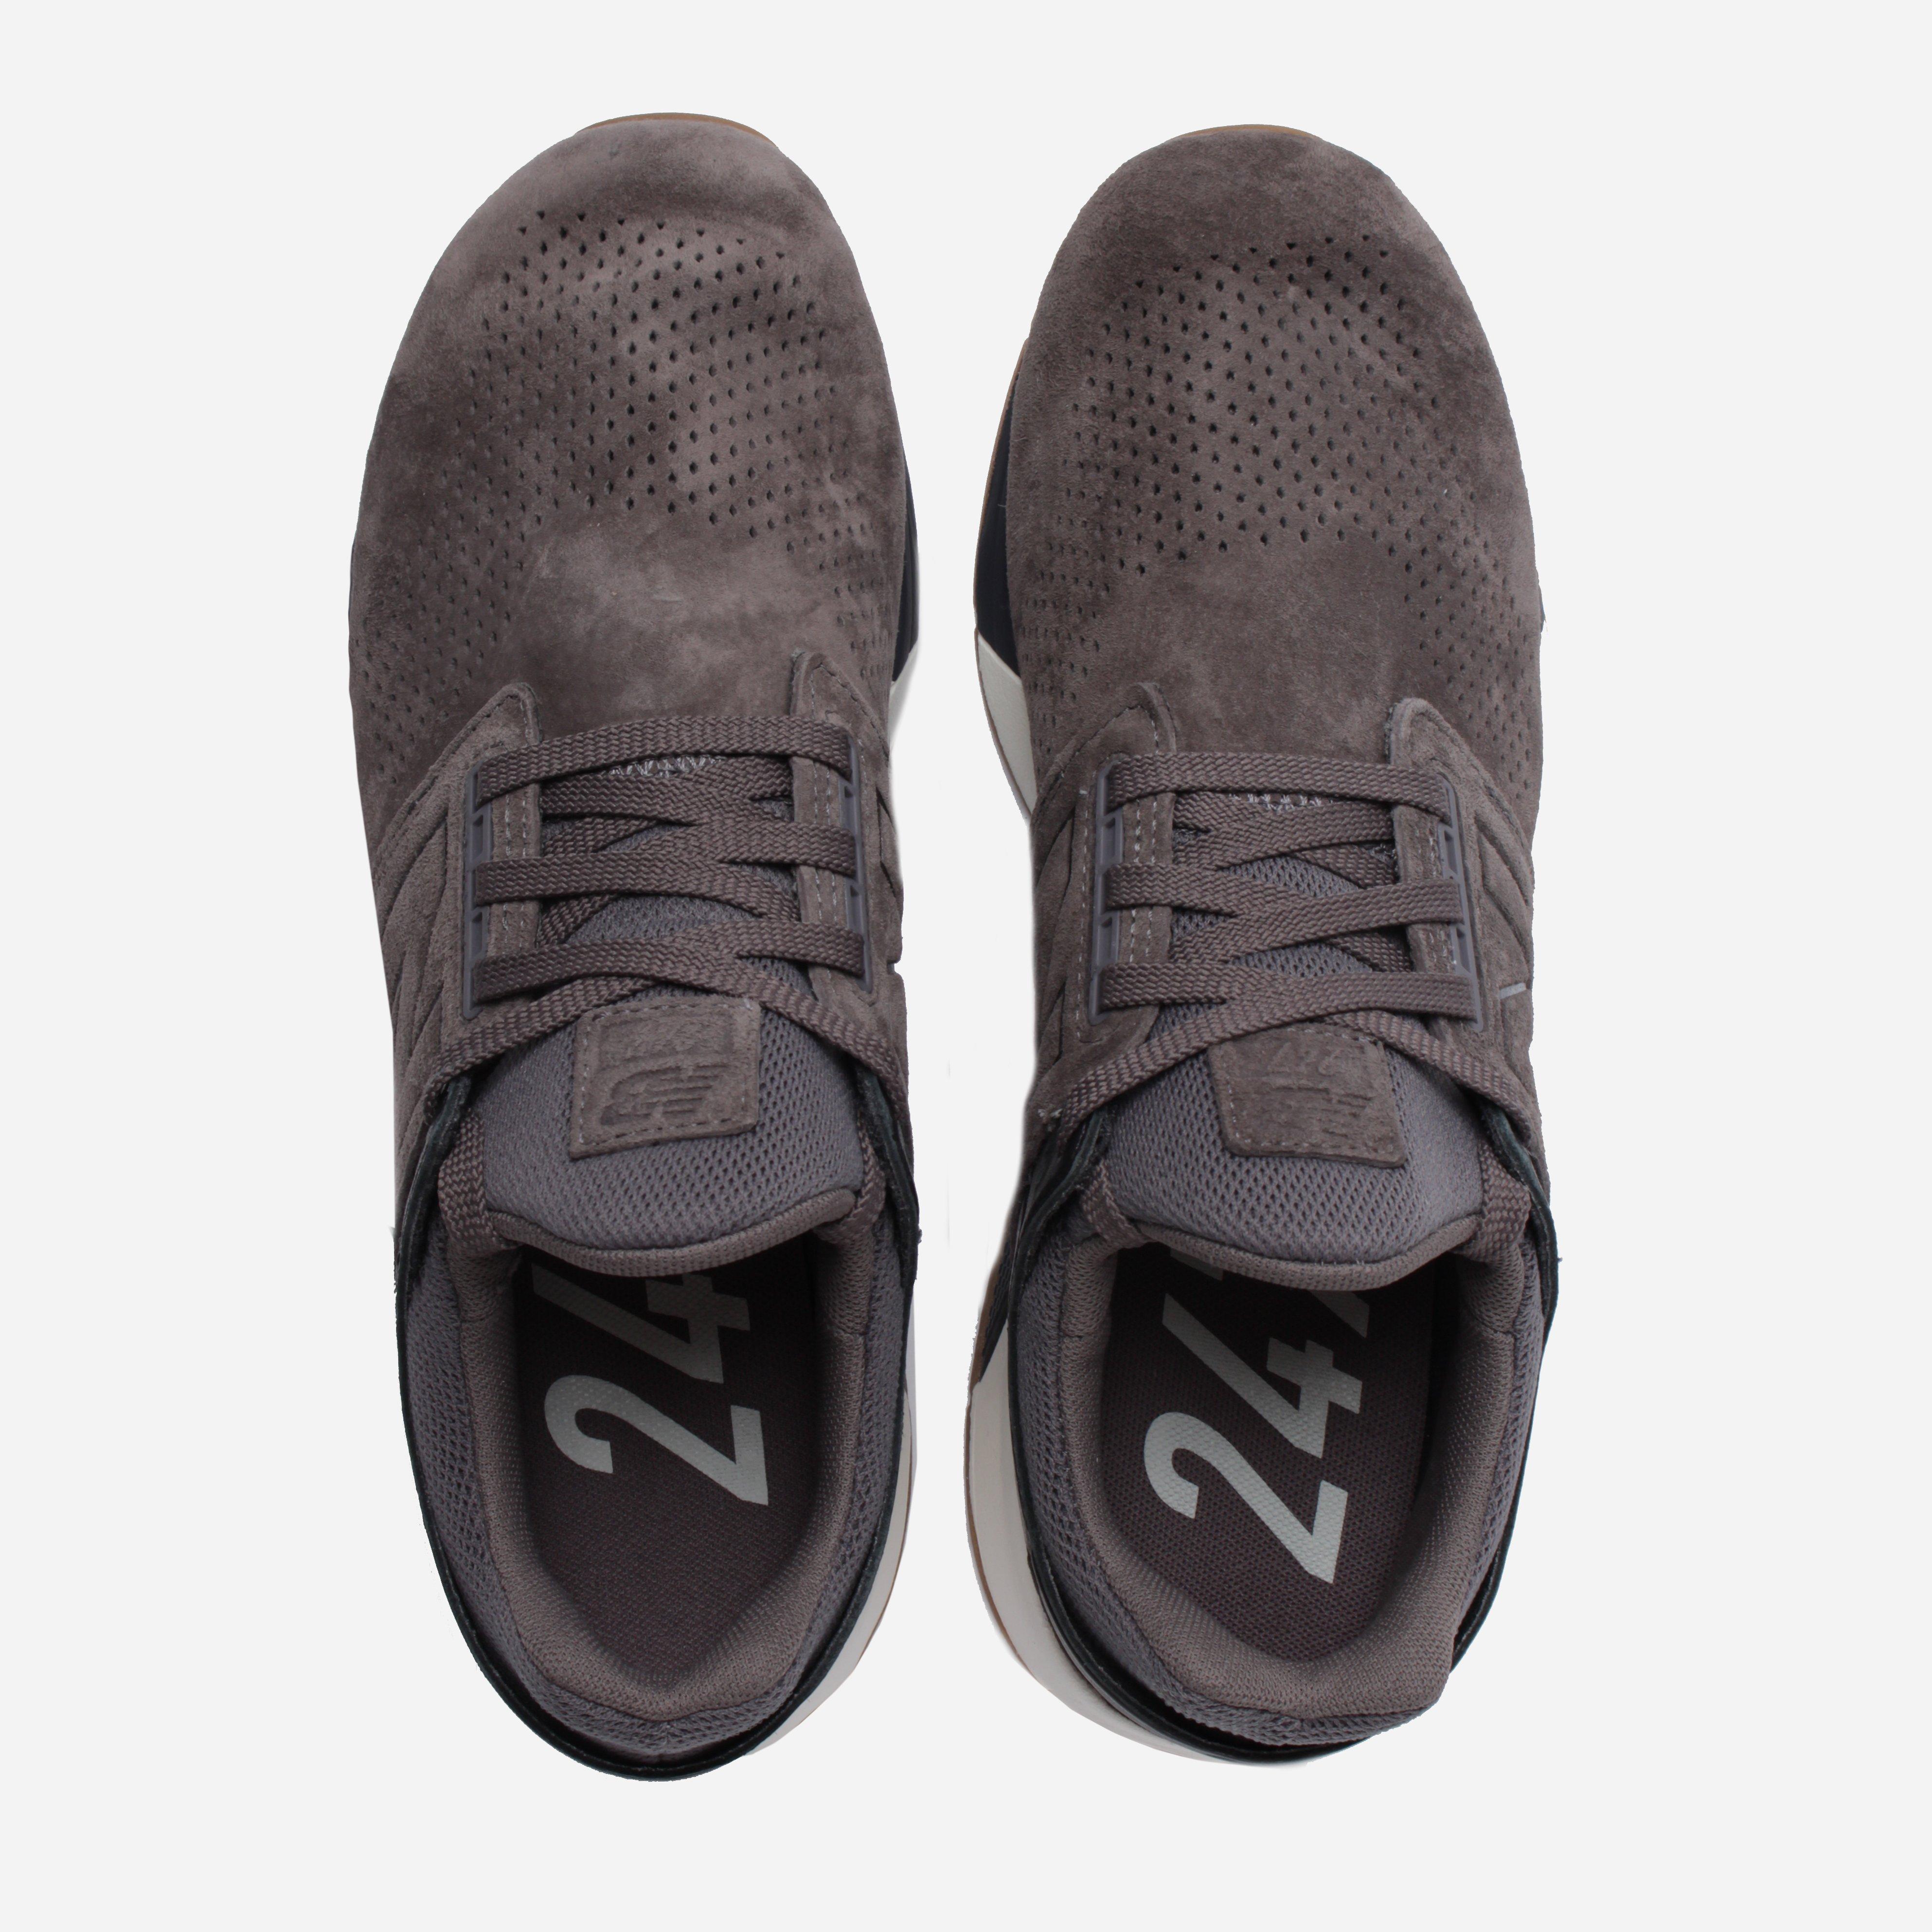 New Balance Ms 247 Lg in Grey (Gray) for Men - Lyst